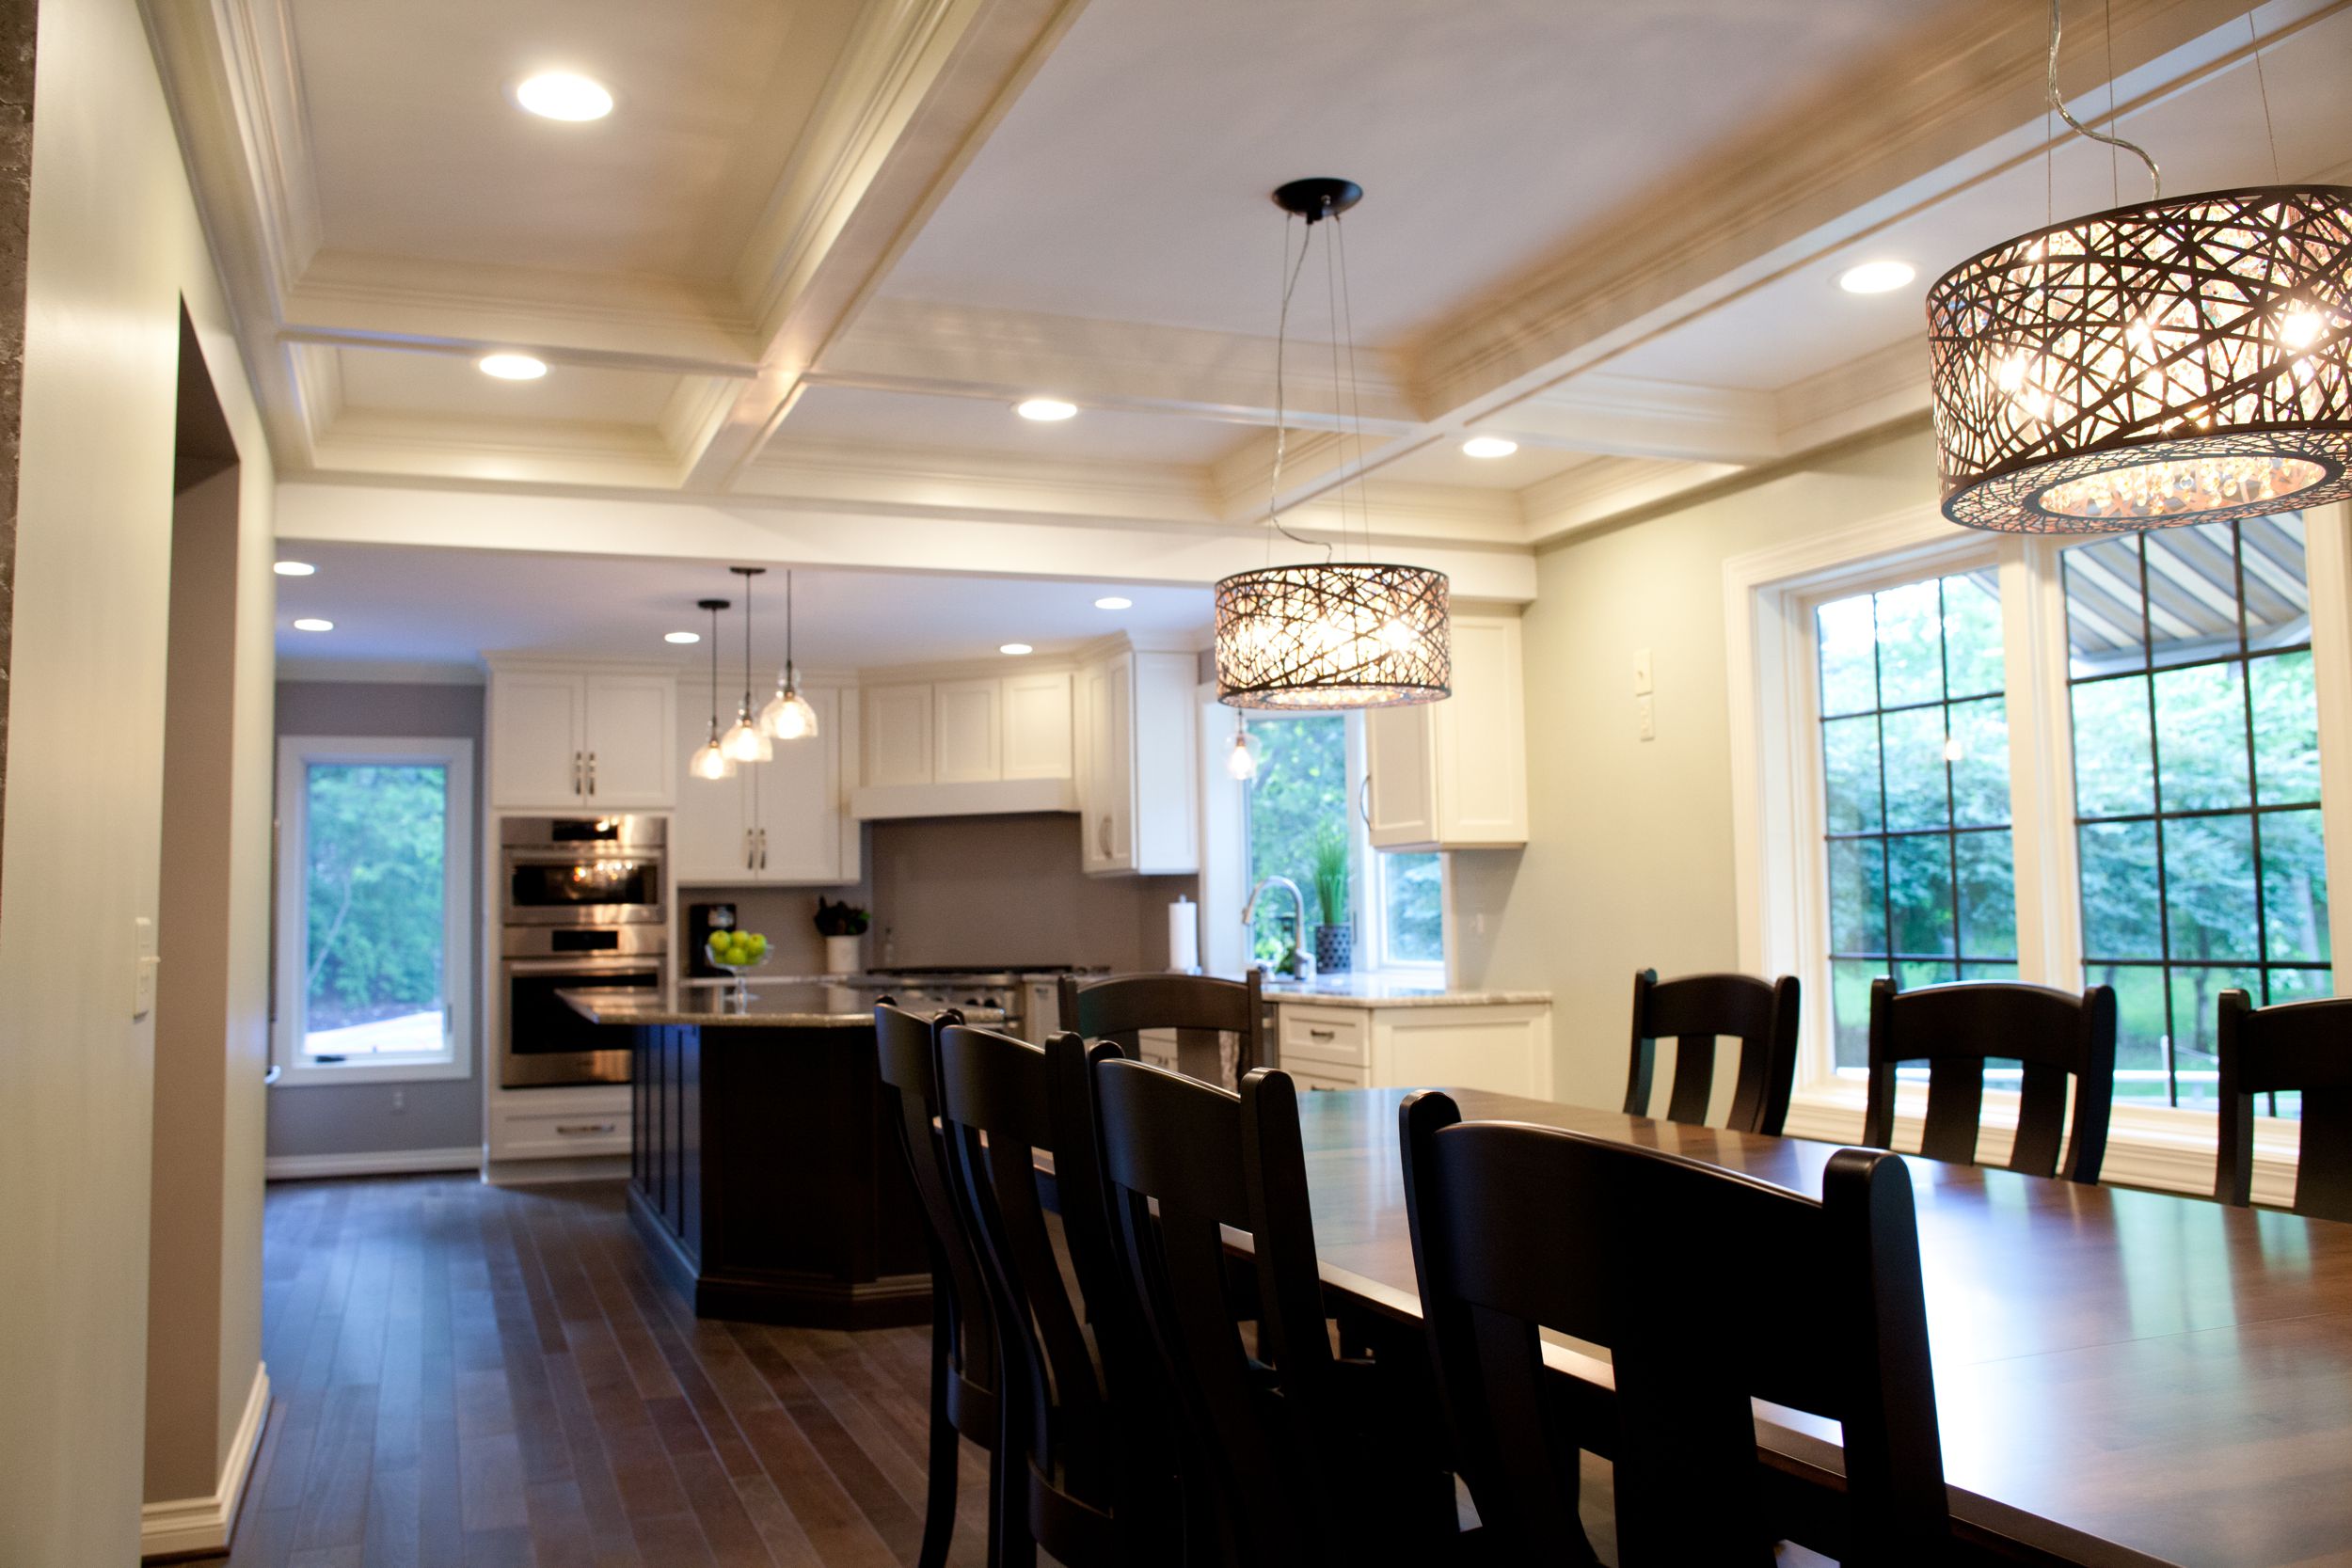 Wood table with white coffered ceilings above